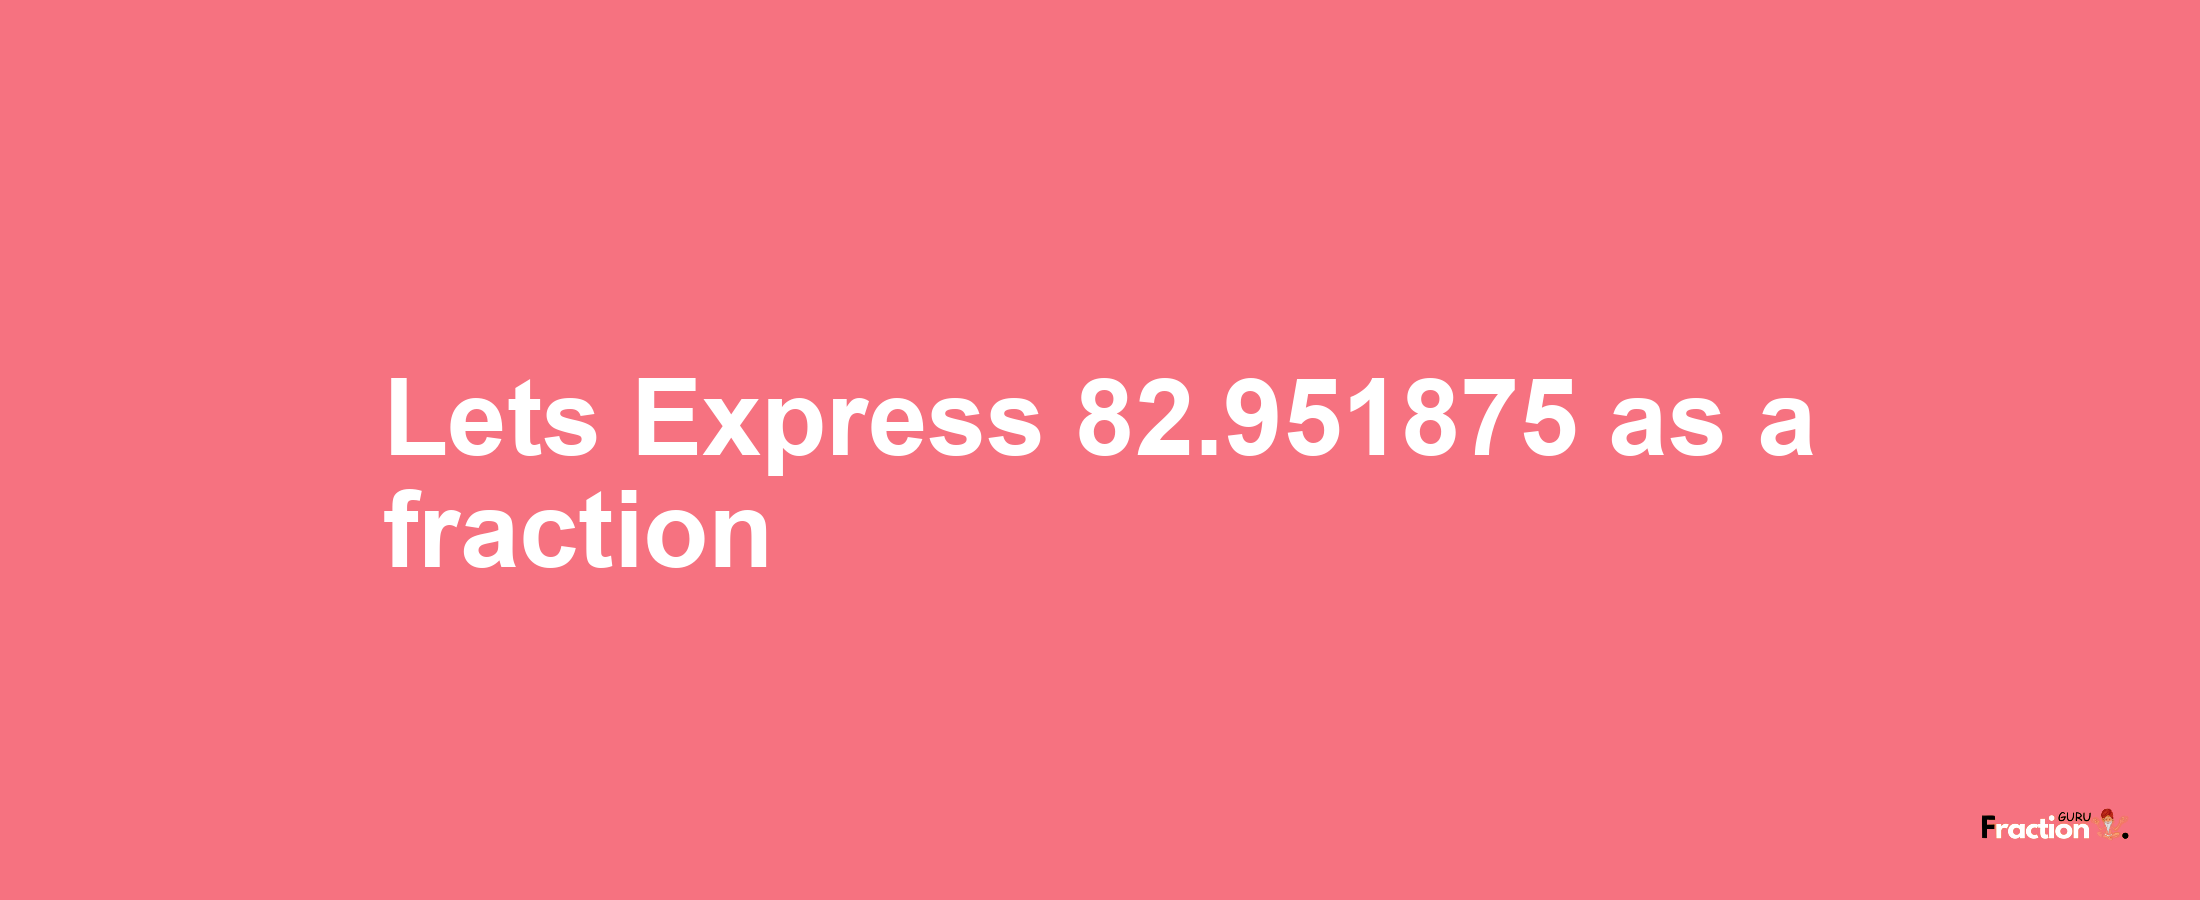 Lets Express 82.951875 as afraction